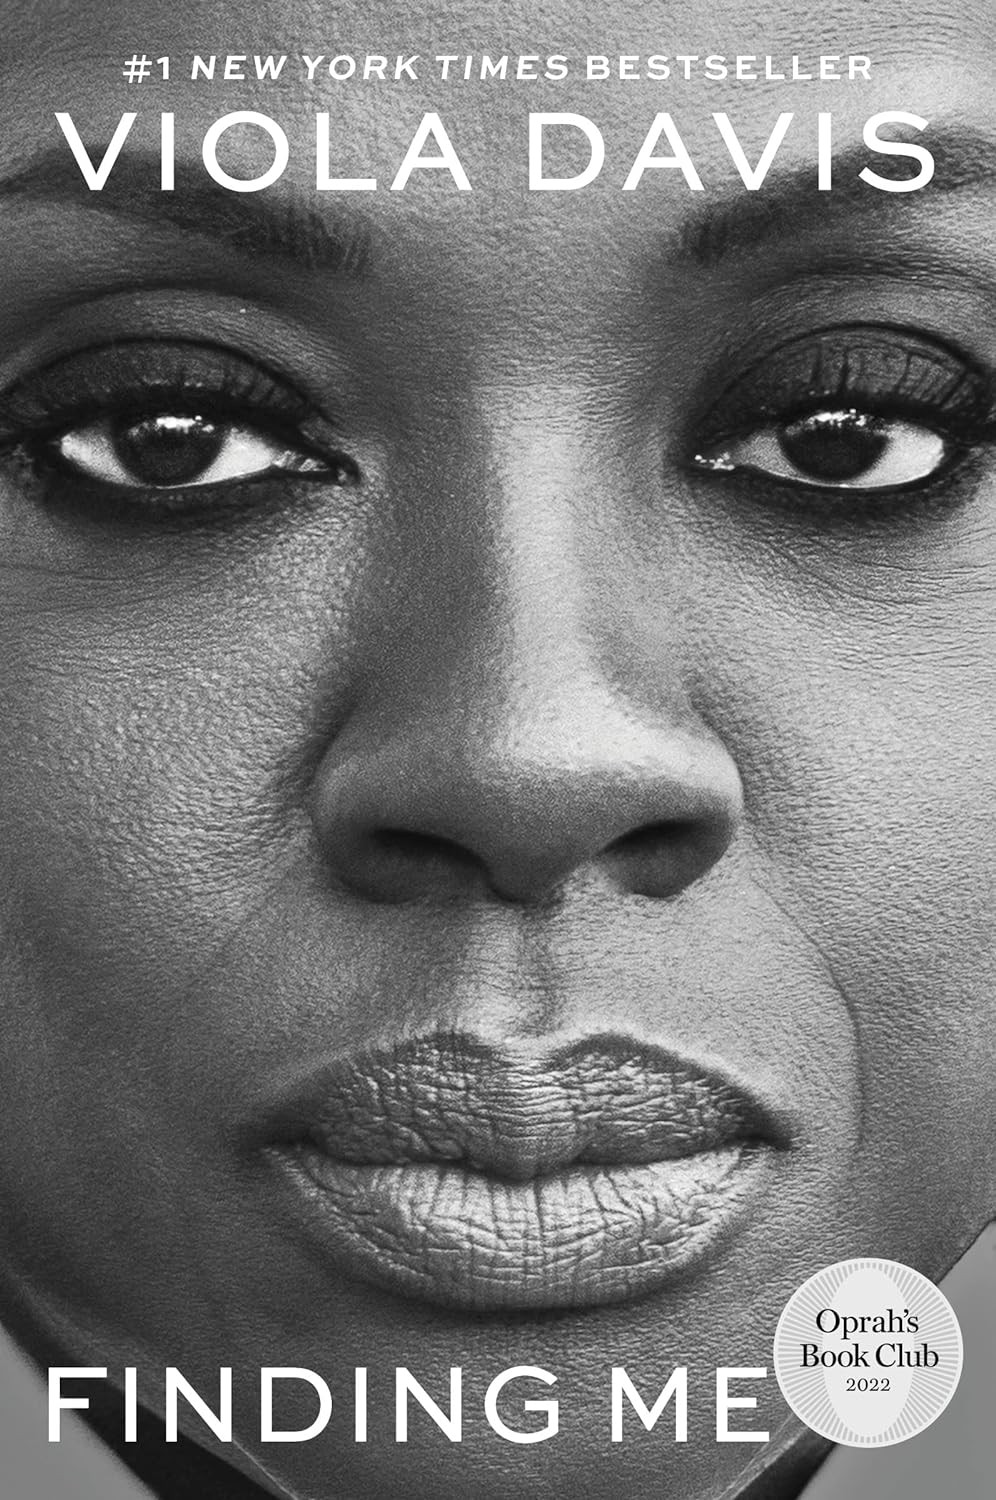 <p>Viola Davis takes us through the story of her life. Consider this a love letter to self, especially since embracing who you truly are can take serious courage. "This is the path I took to finding my purpose but also my voice in a world that didn’t always see me," she says in the official synopsis.</p><p>"I love audiobooks so I actually have Viola Davis reading to me every night," Jessica says.</p><p><em>Finding Me has a 5-star rating on Amazon, and a <span>4.6 </span><span>on Goodreads<em>, both out of 5.</em></span></em></p>